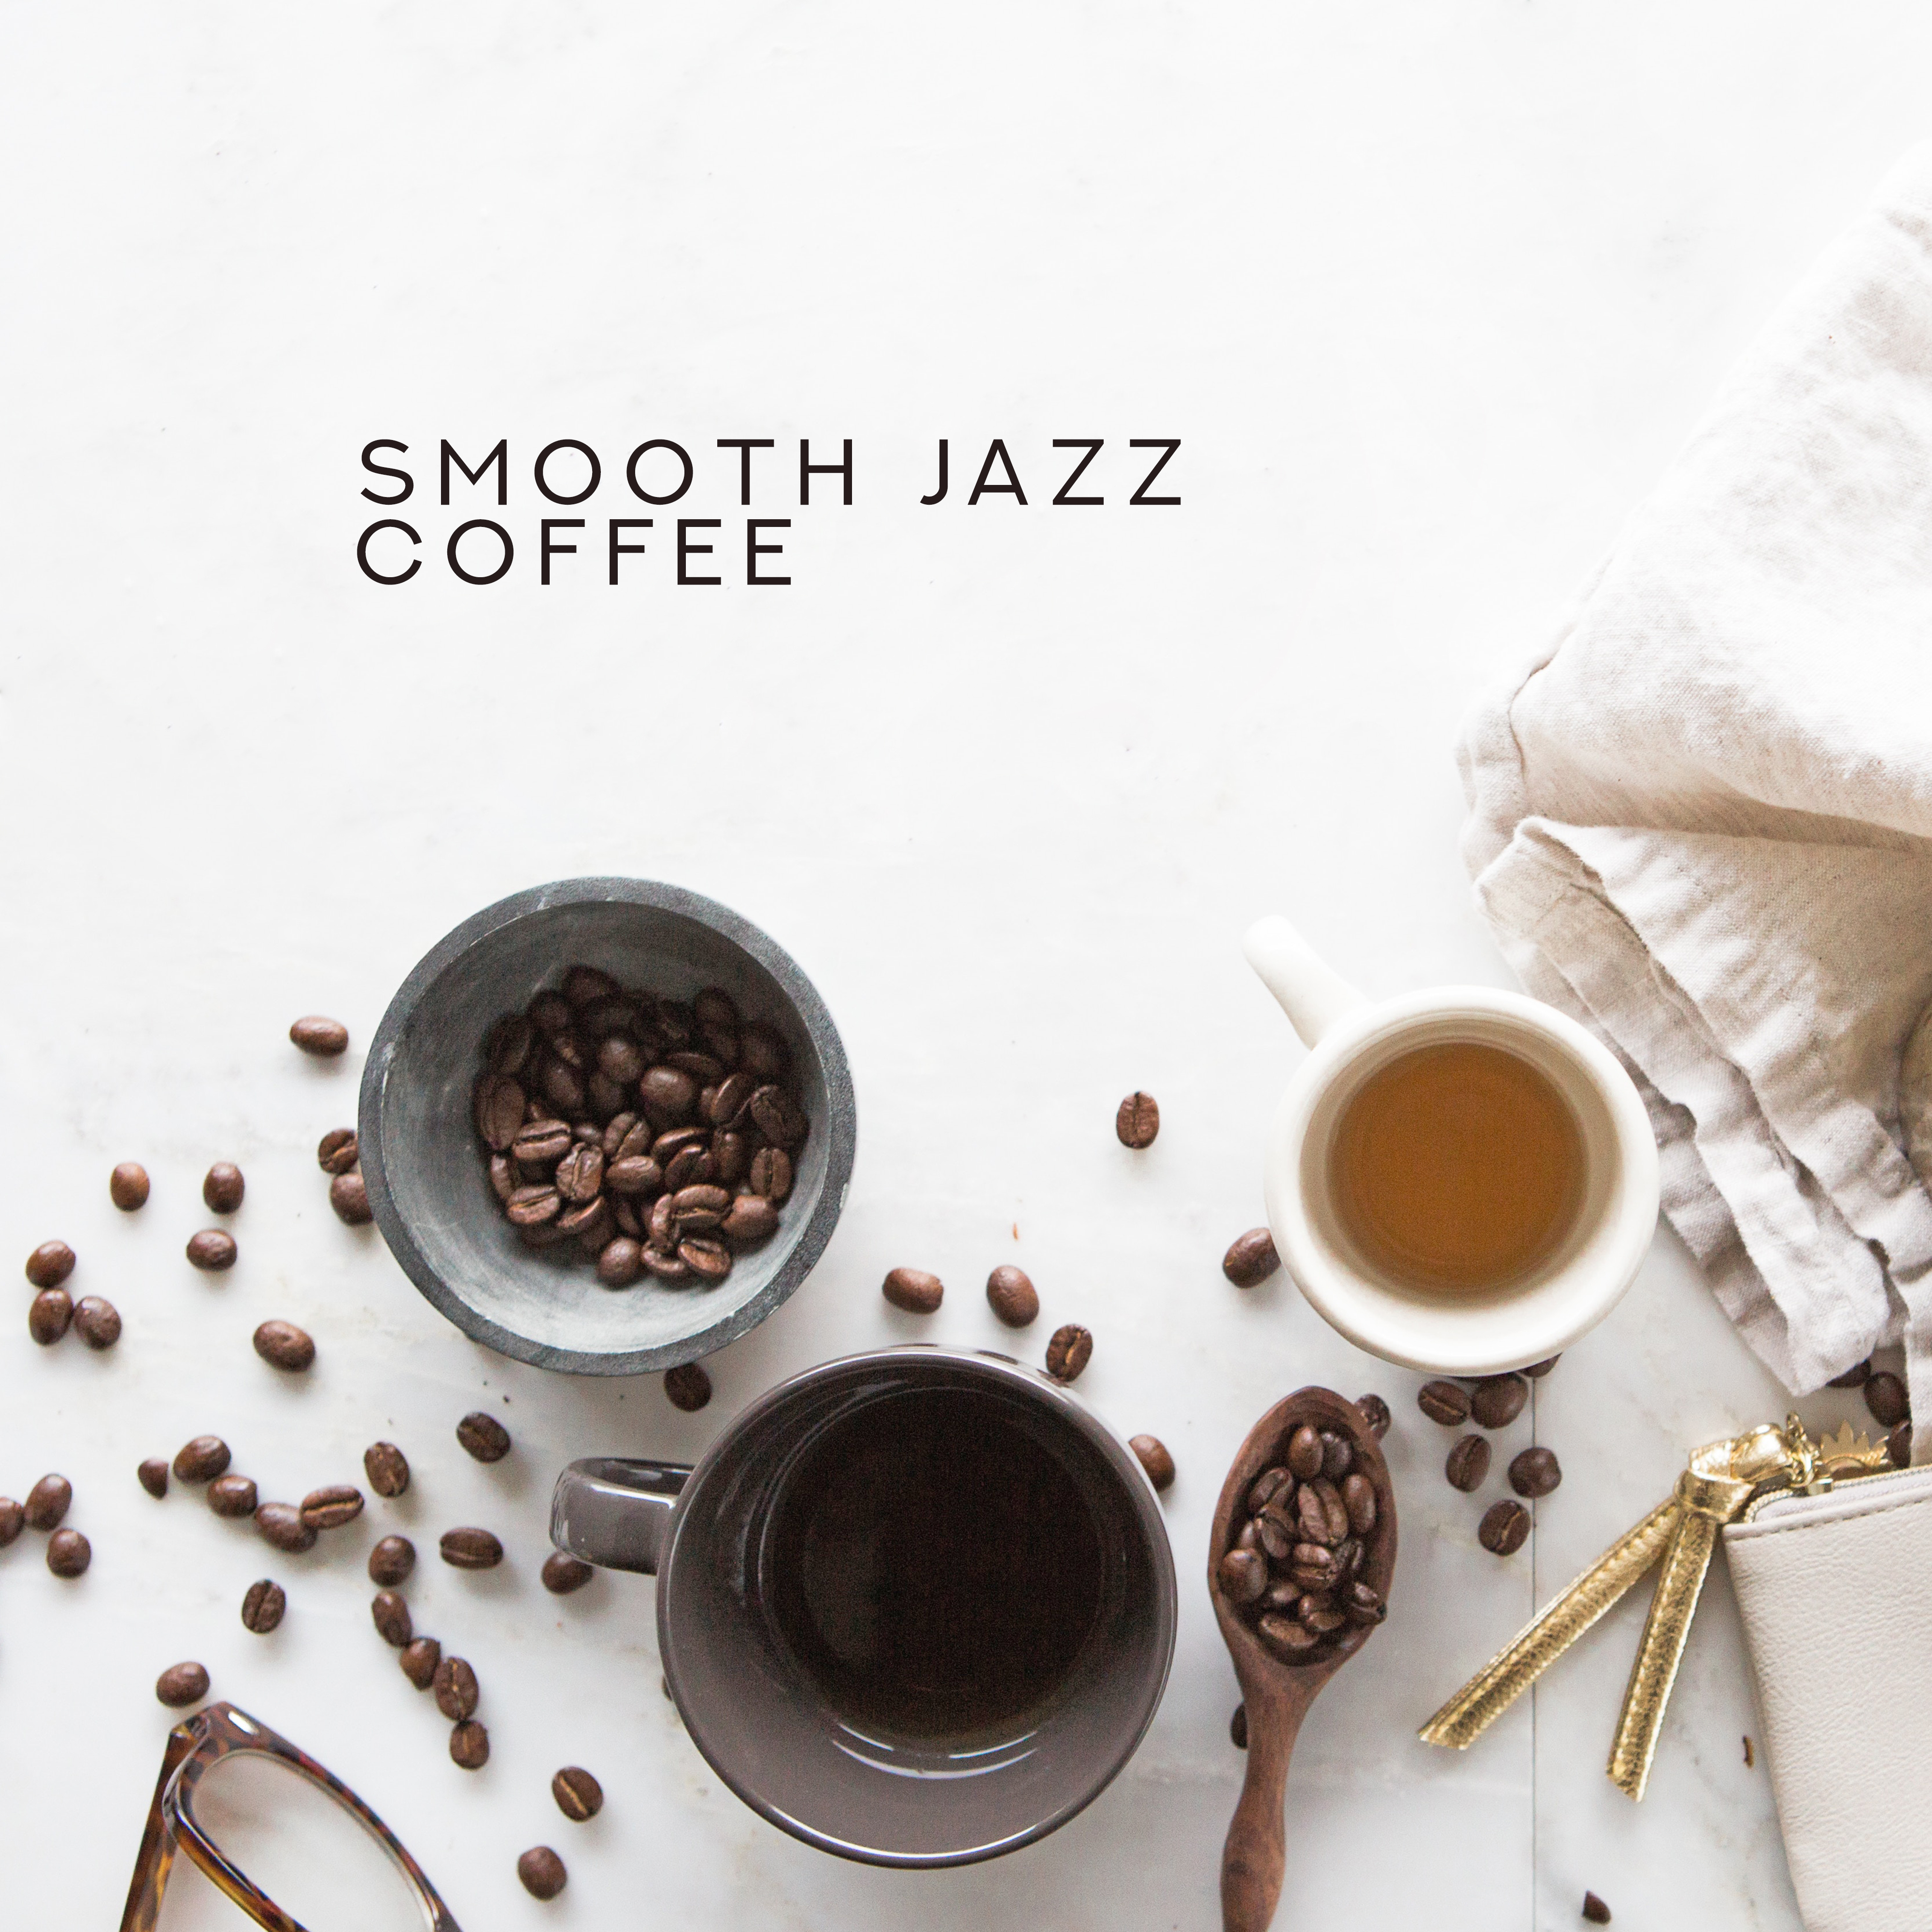 Smooth Jazz Coffee  Restaurant Music, Perfect Relax, Jazz Lounge, Dinner Songs, Instrumental Jazz Songs